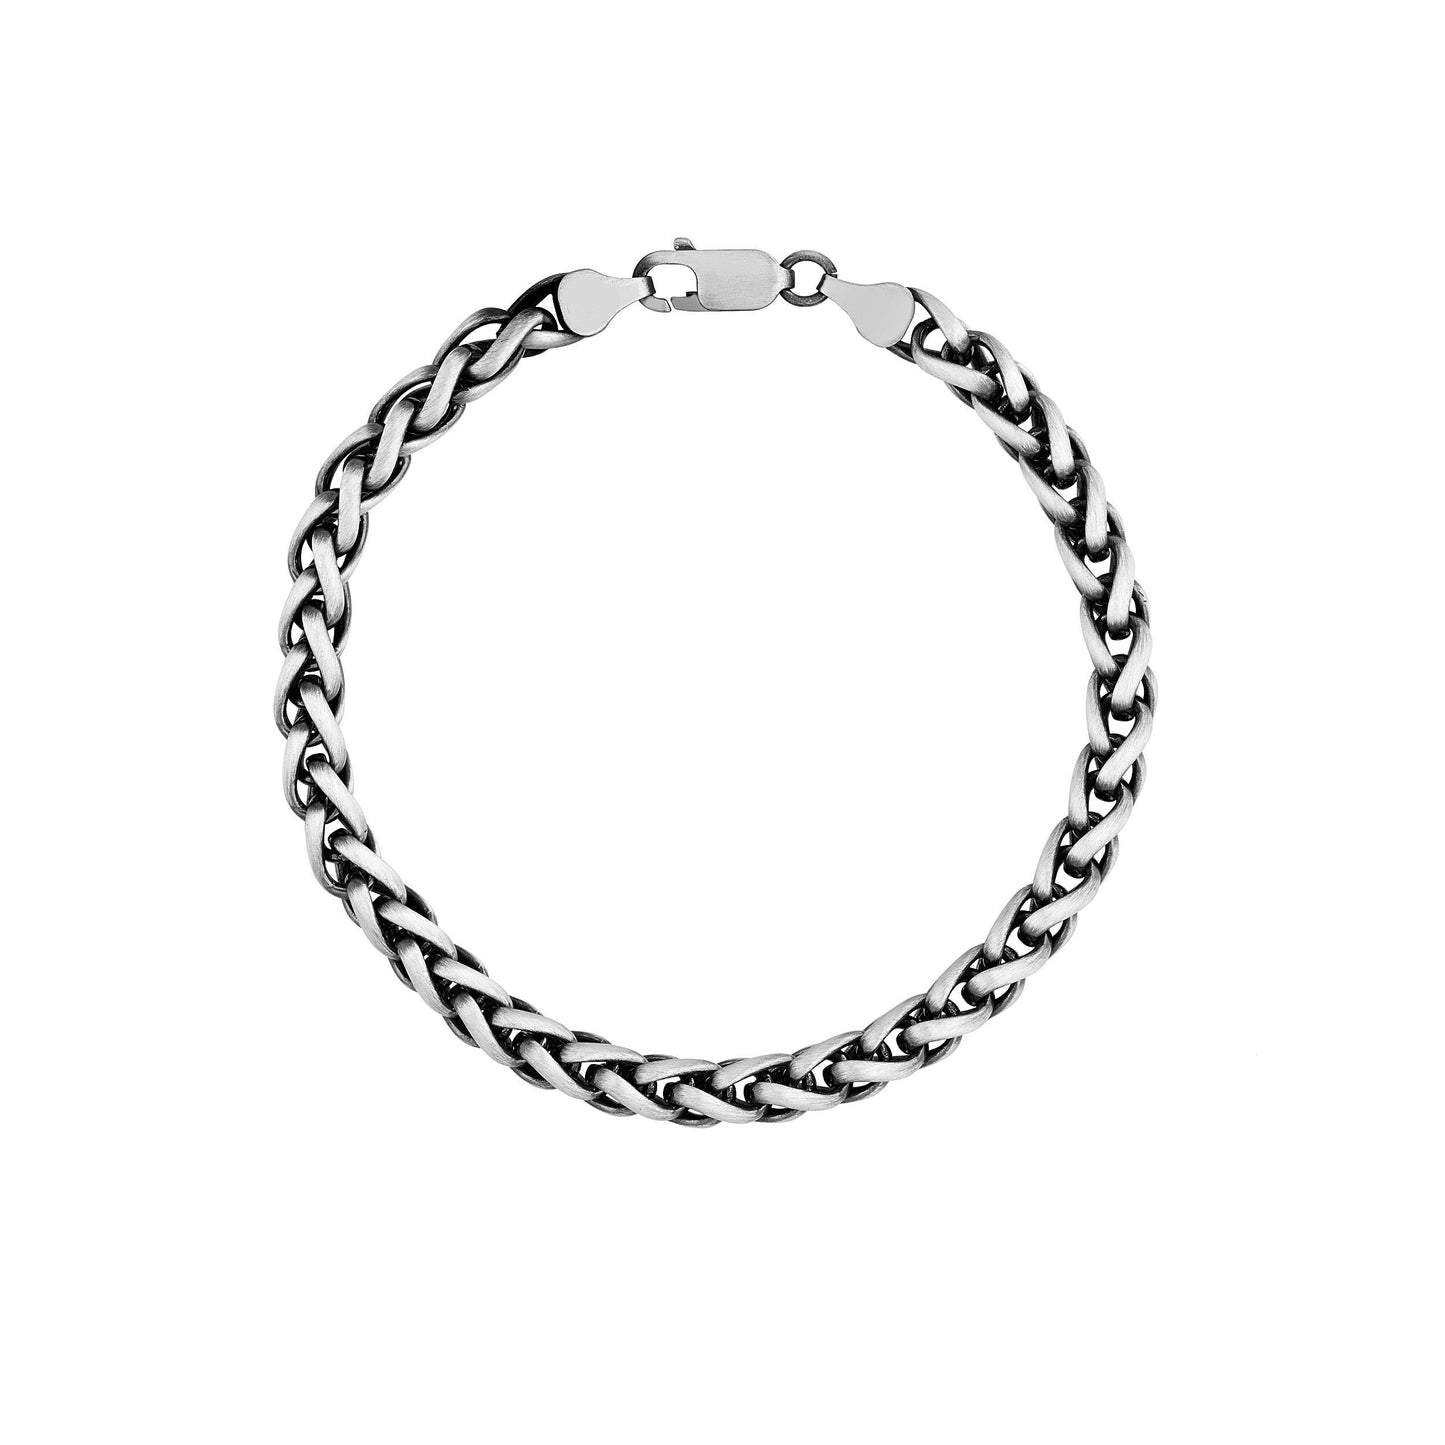 Oxidized Sterling Silver Round Wheat Chain Necklace, 22 Inches